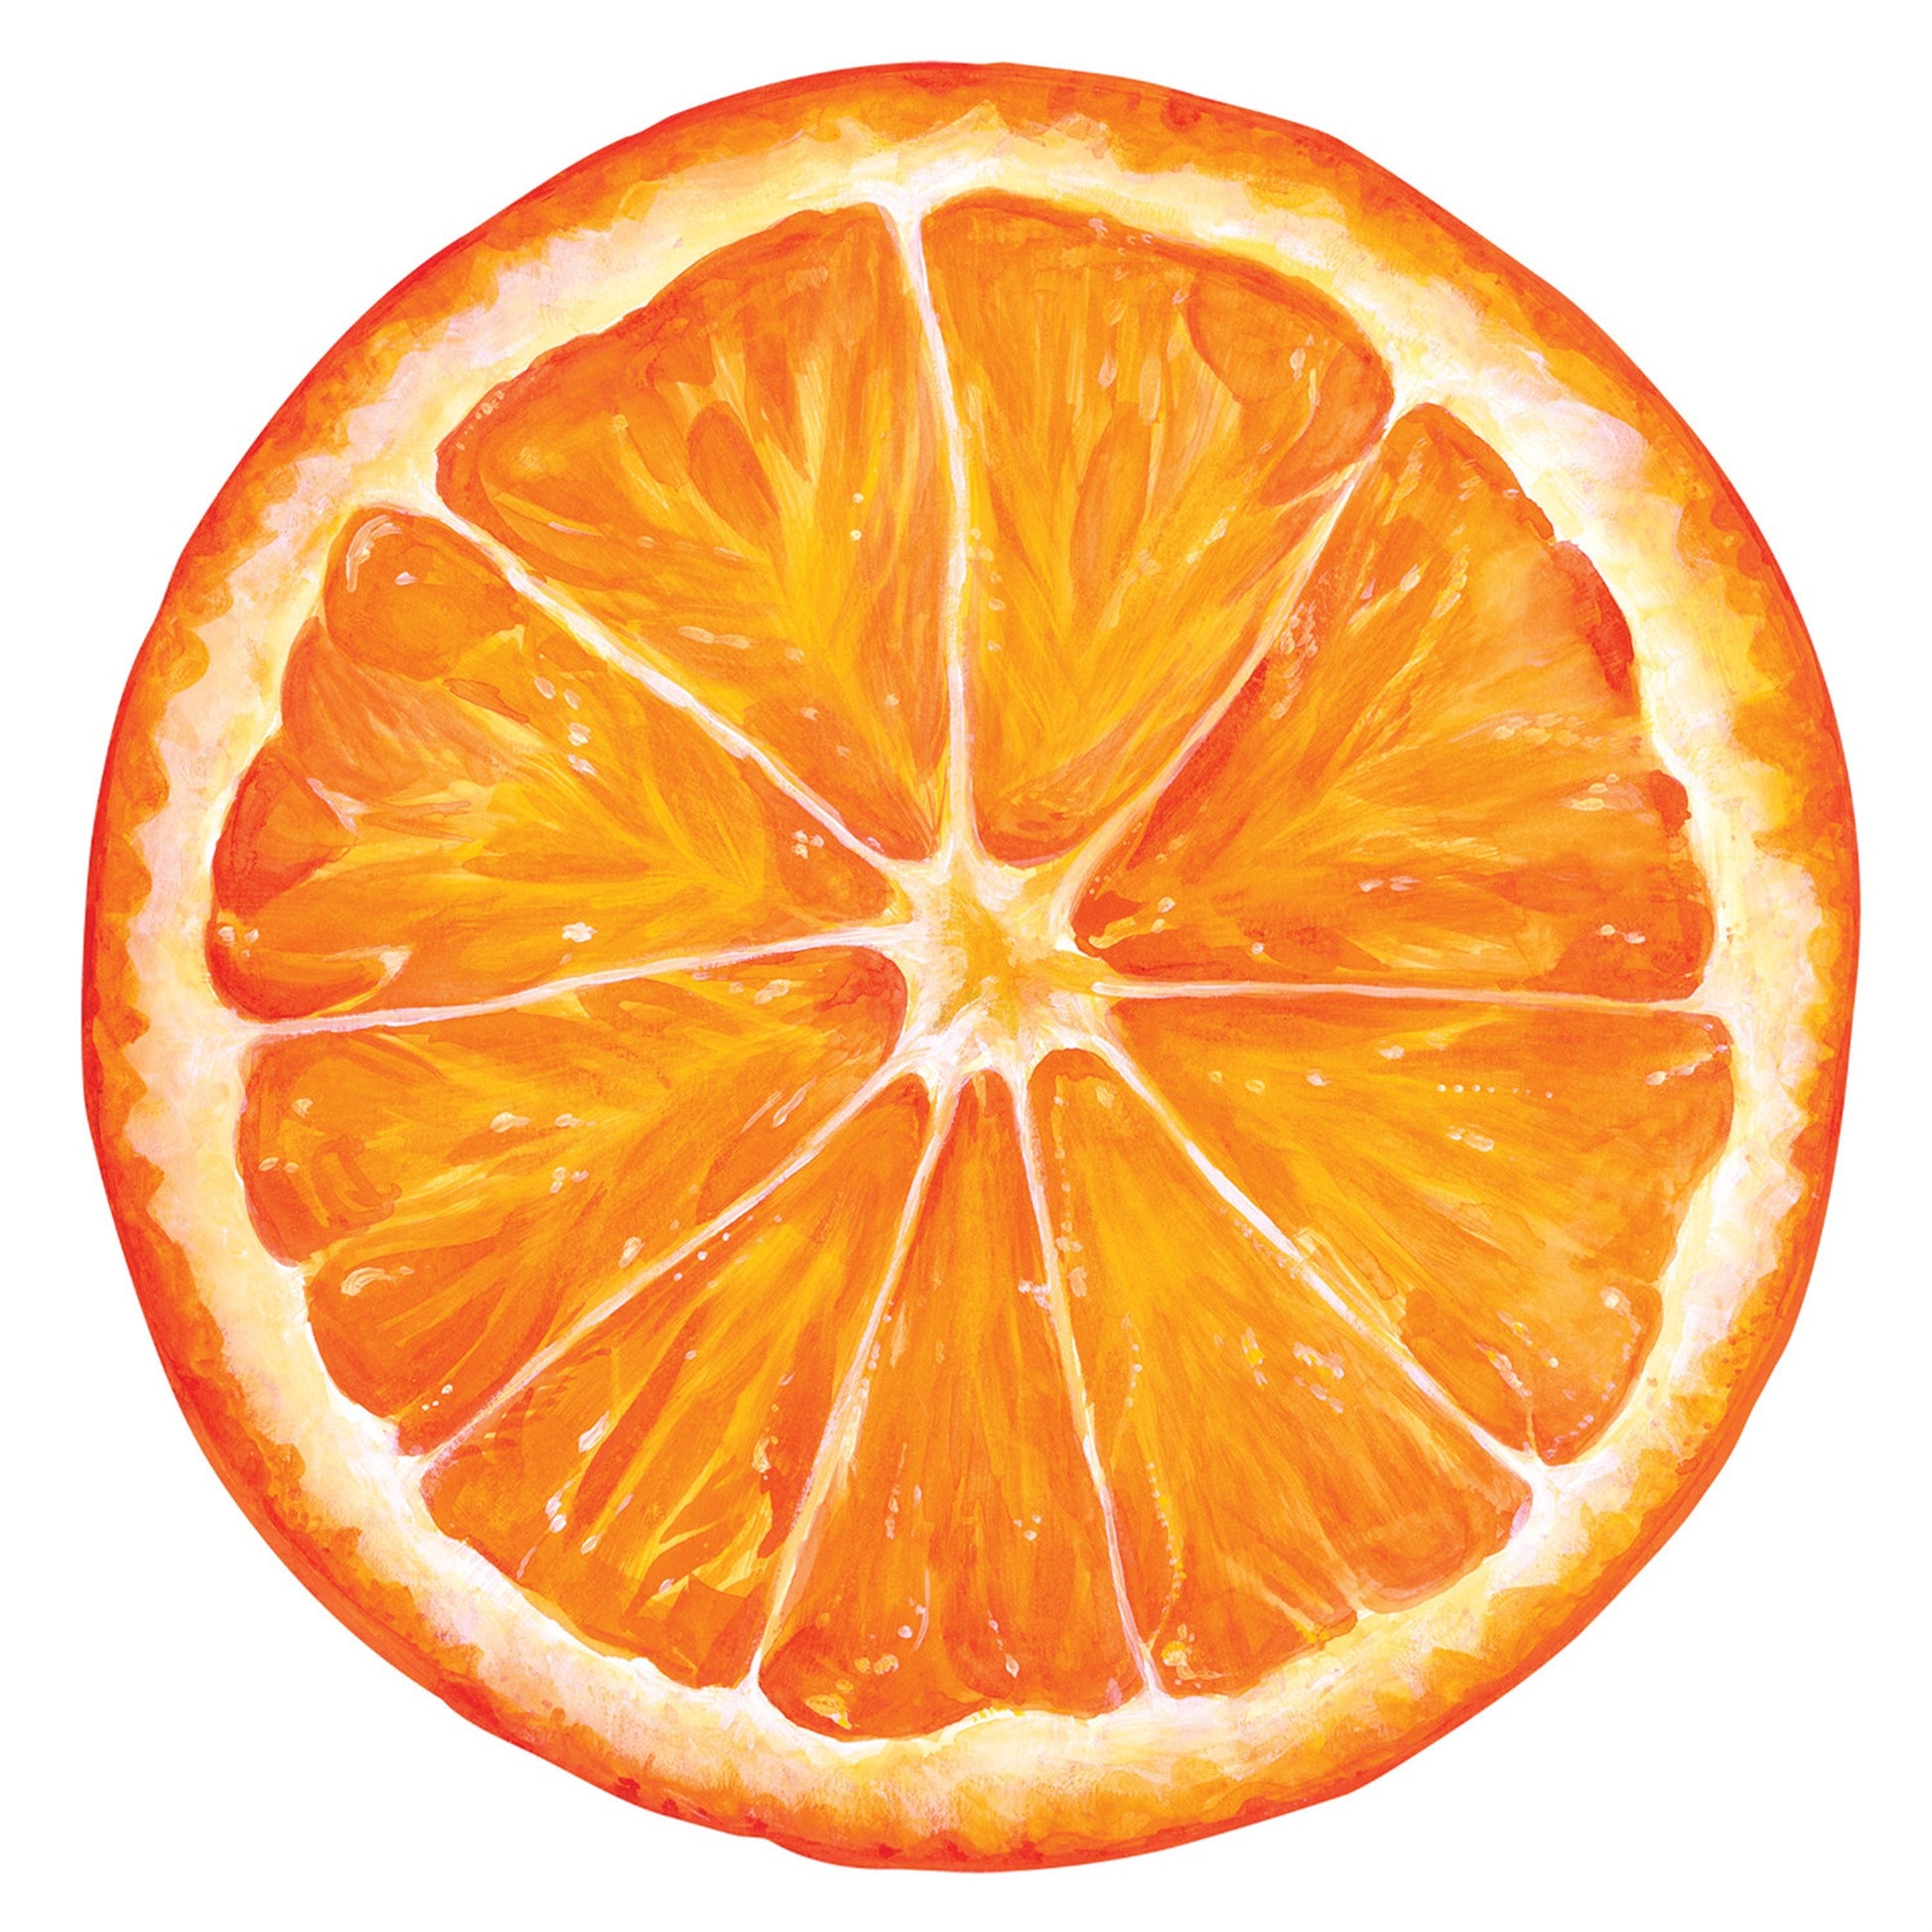 A sliced of an Orange Paper Placemat.